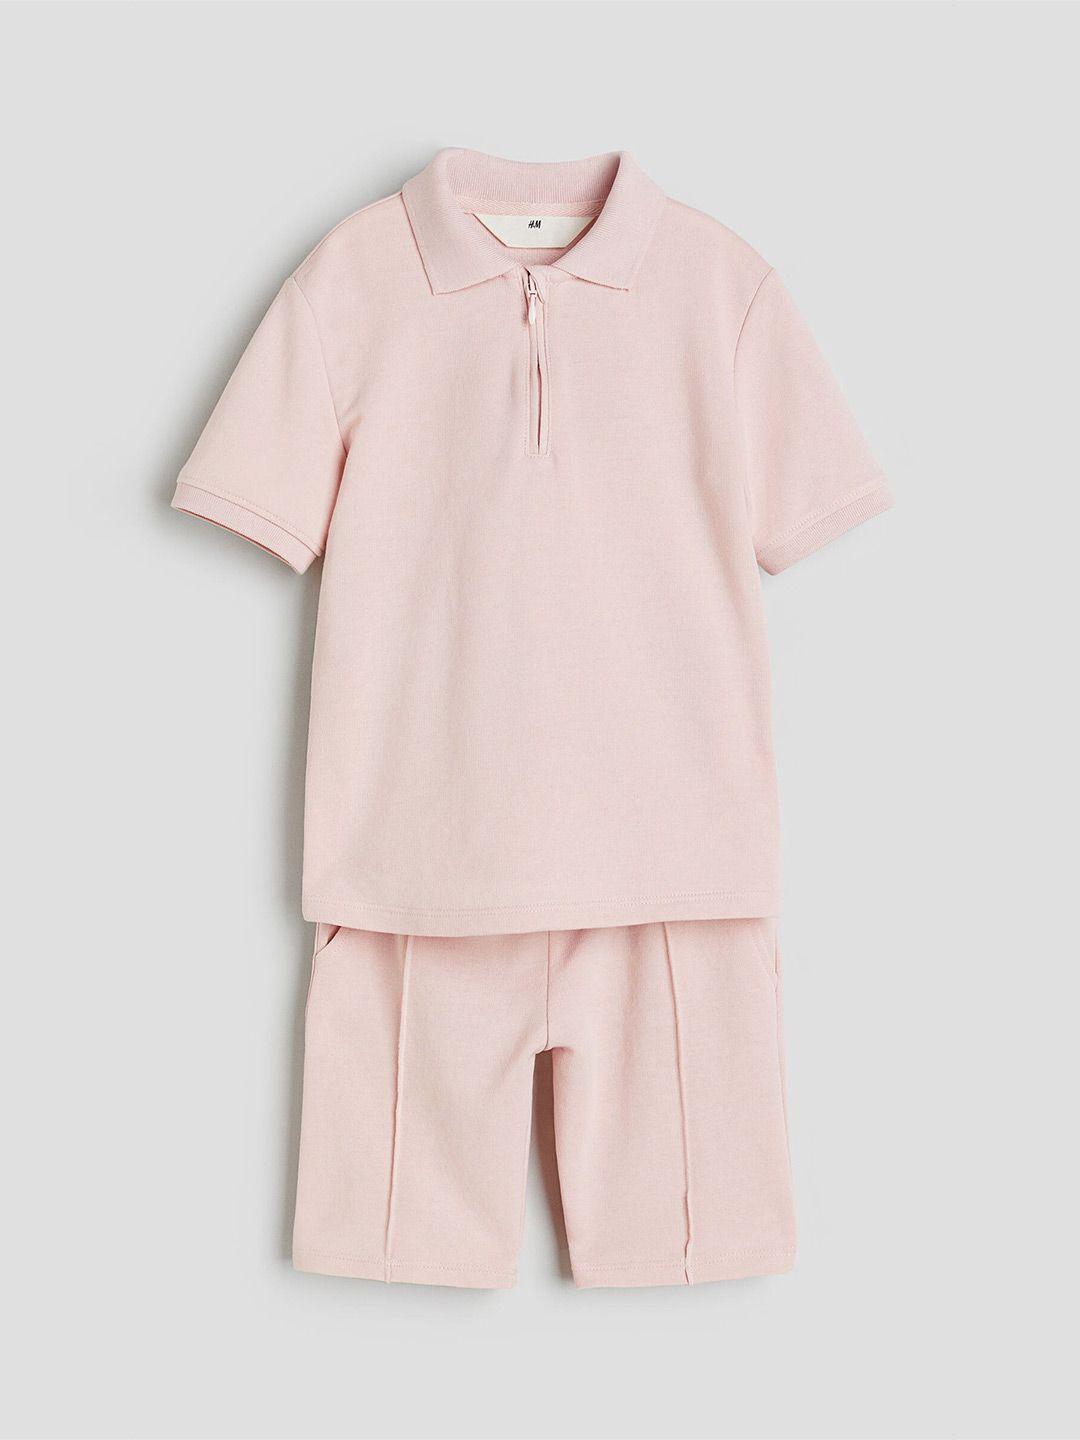 h&m 2-piece polo shirt and shorts set